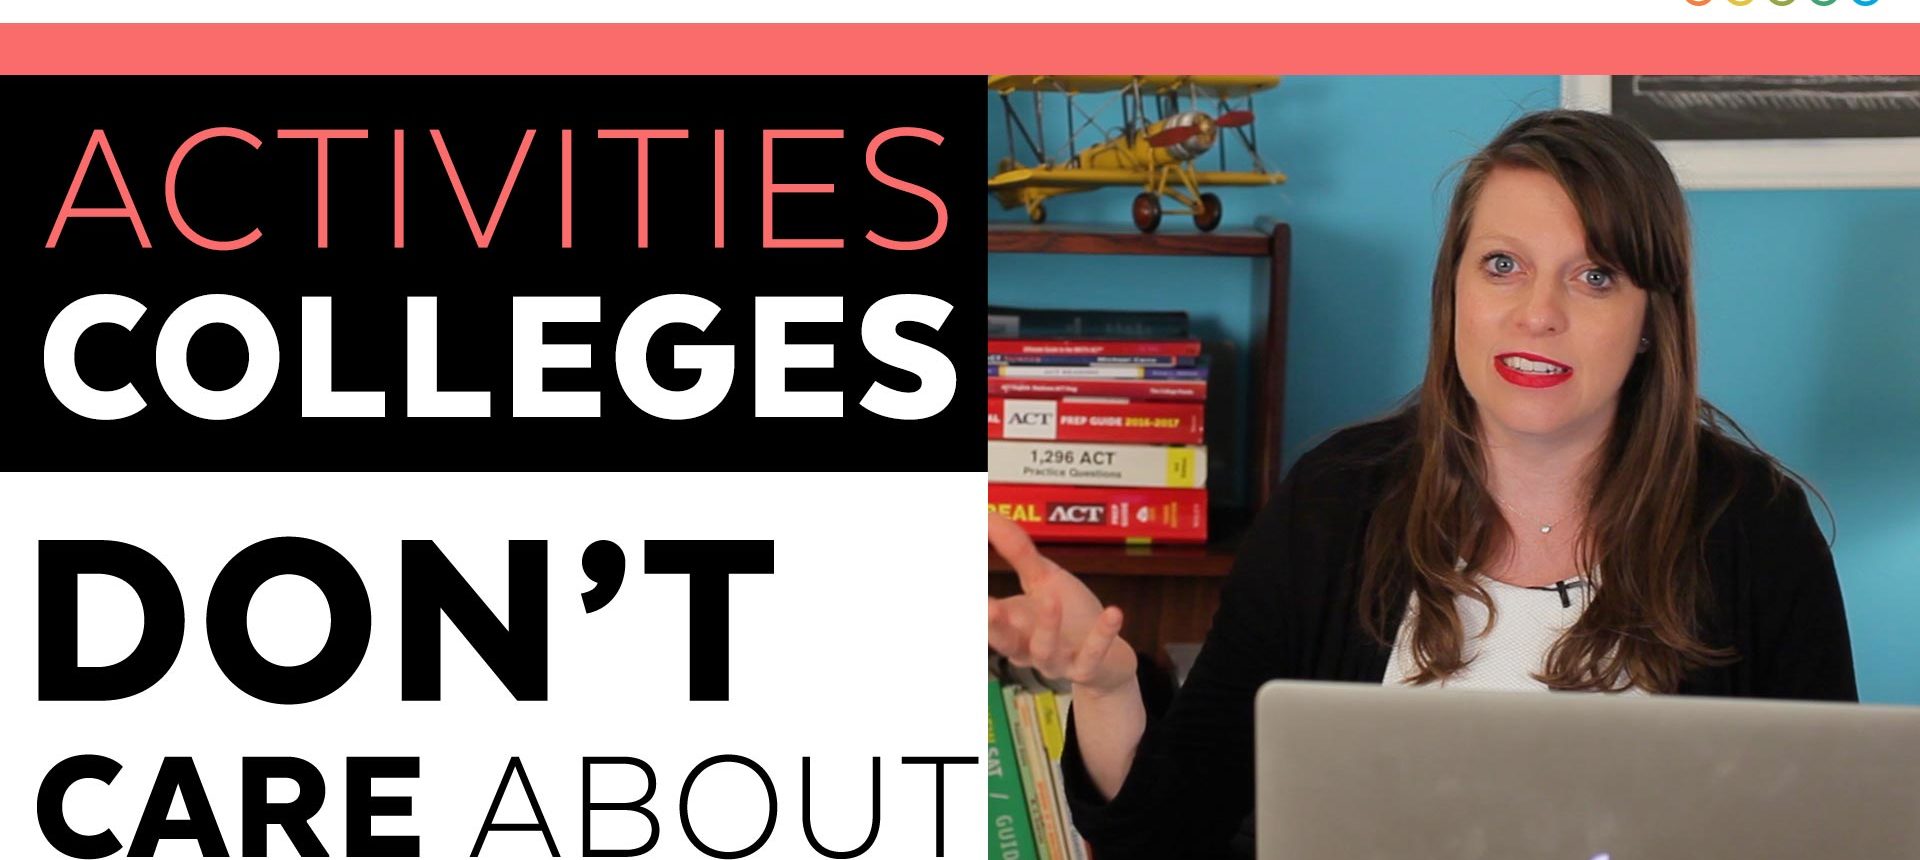 5 Activities That Don’t Help Your College Application